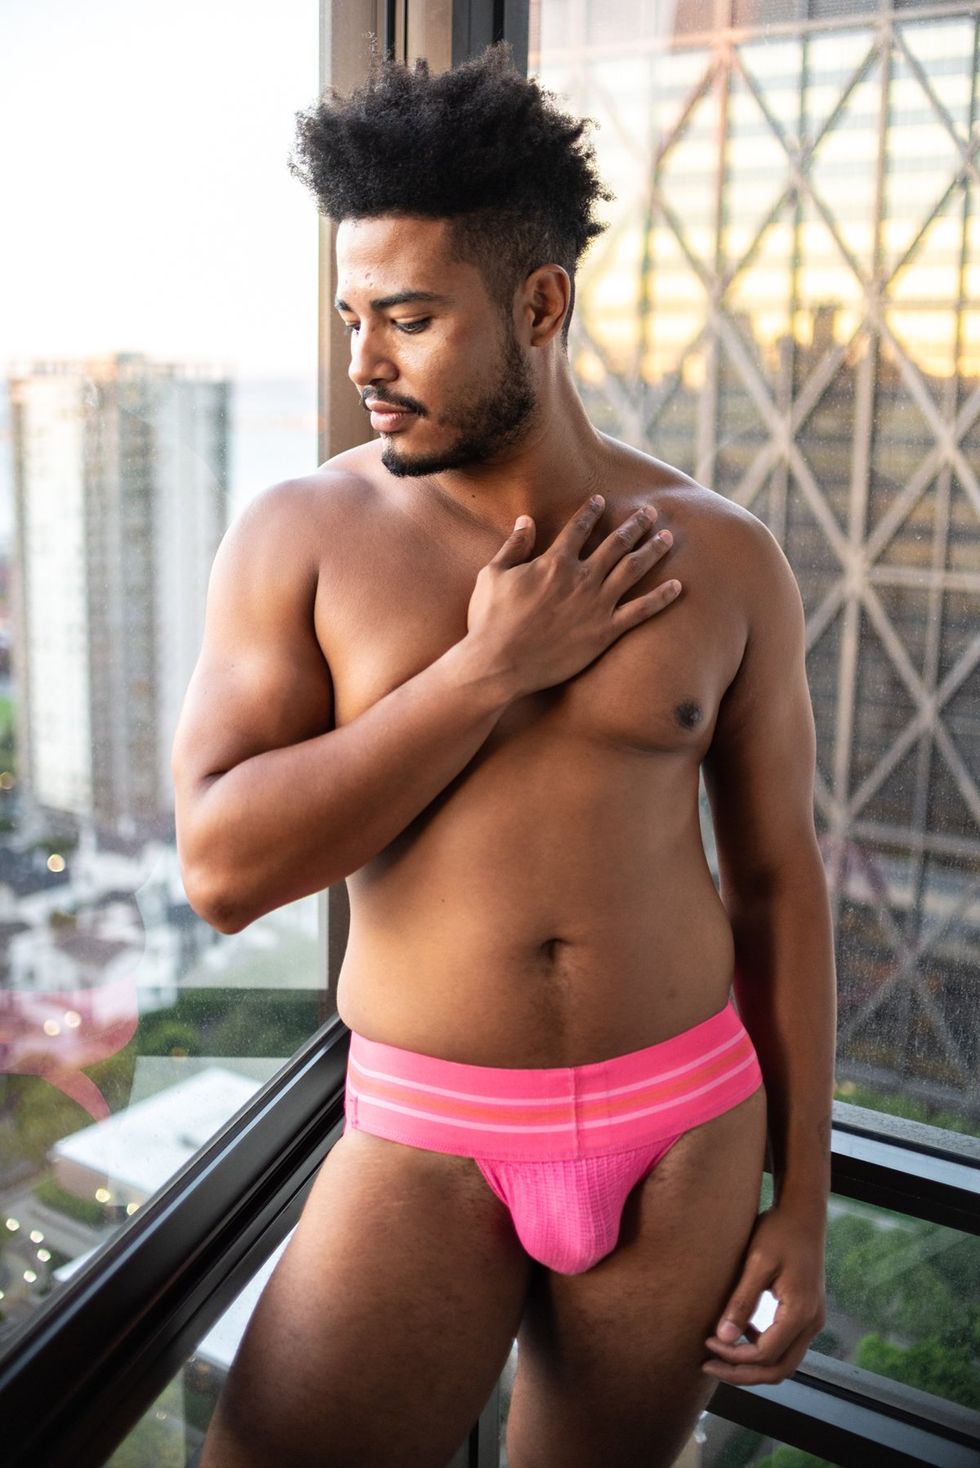 Black man stands in a jock strap with his hand on his chest in a glass elevator